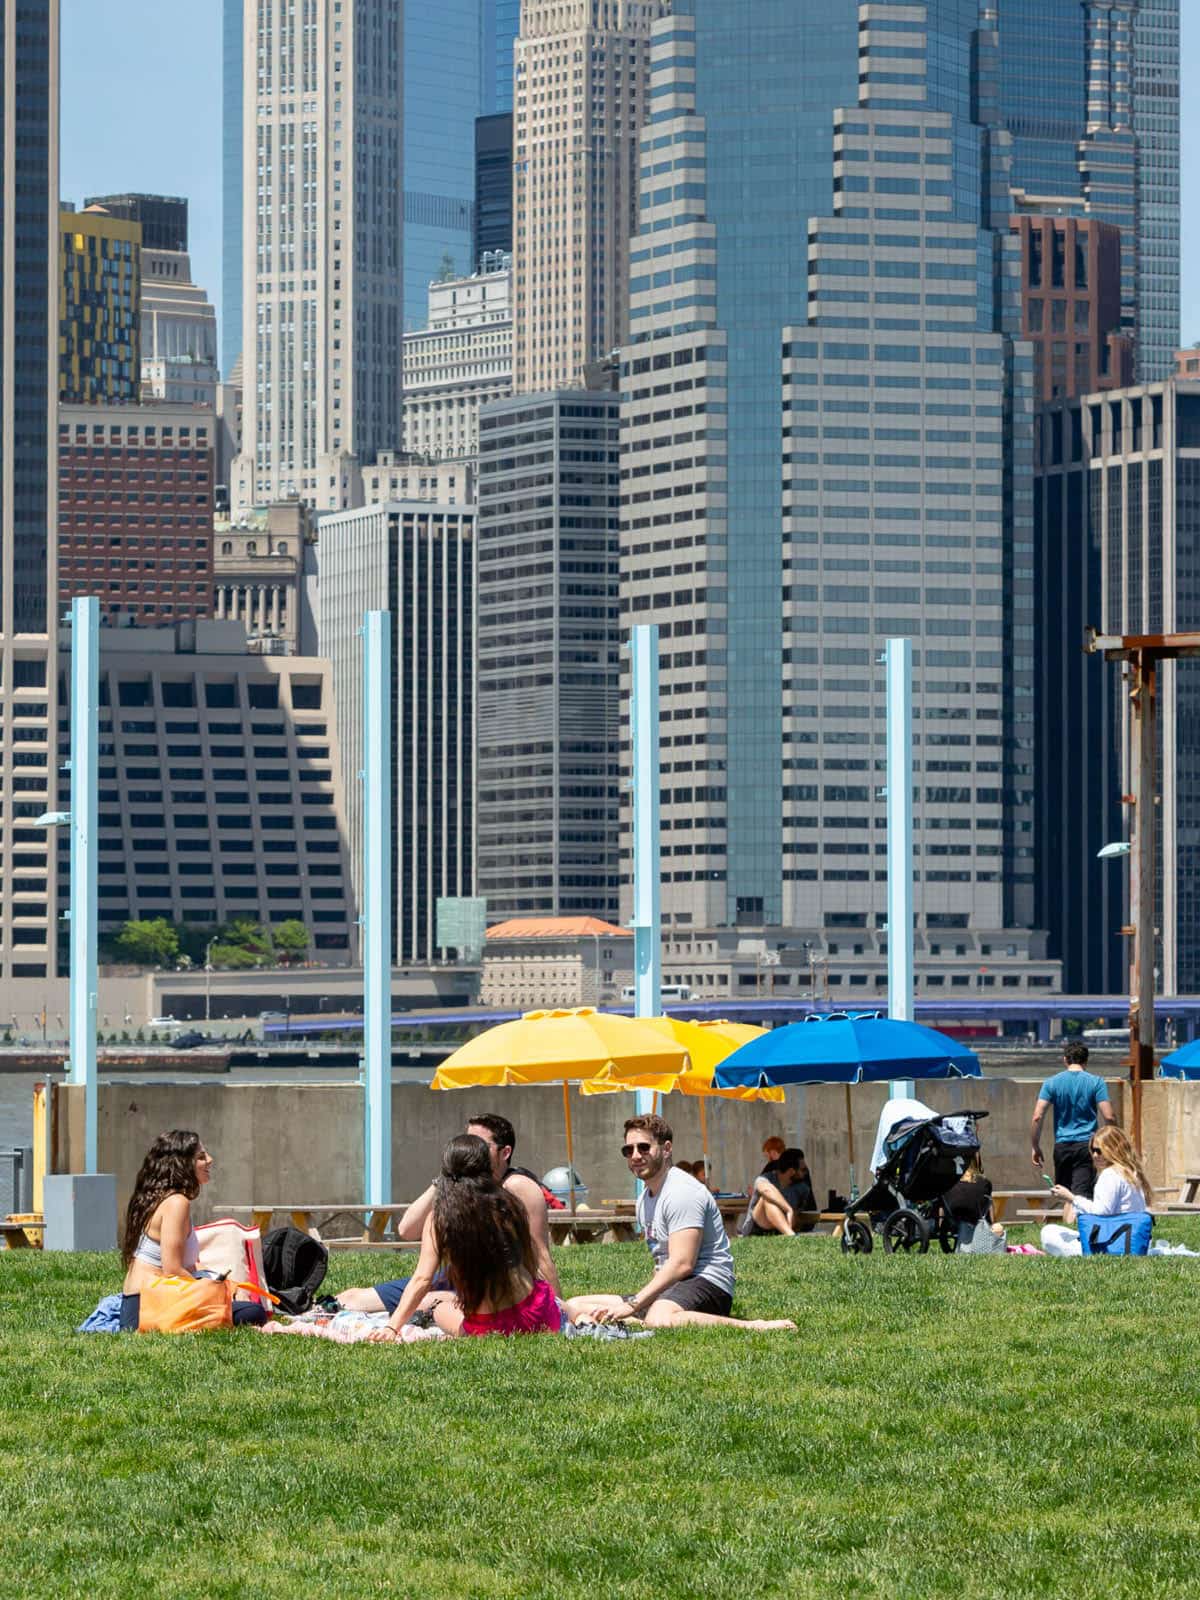 Group of people sitting on a lawn on a sunny day. Lower Manhattan is seen in the background.